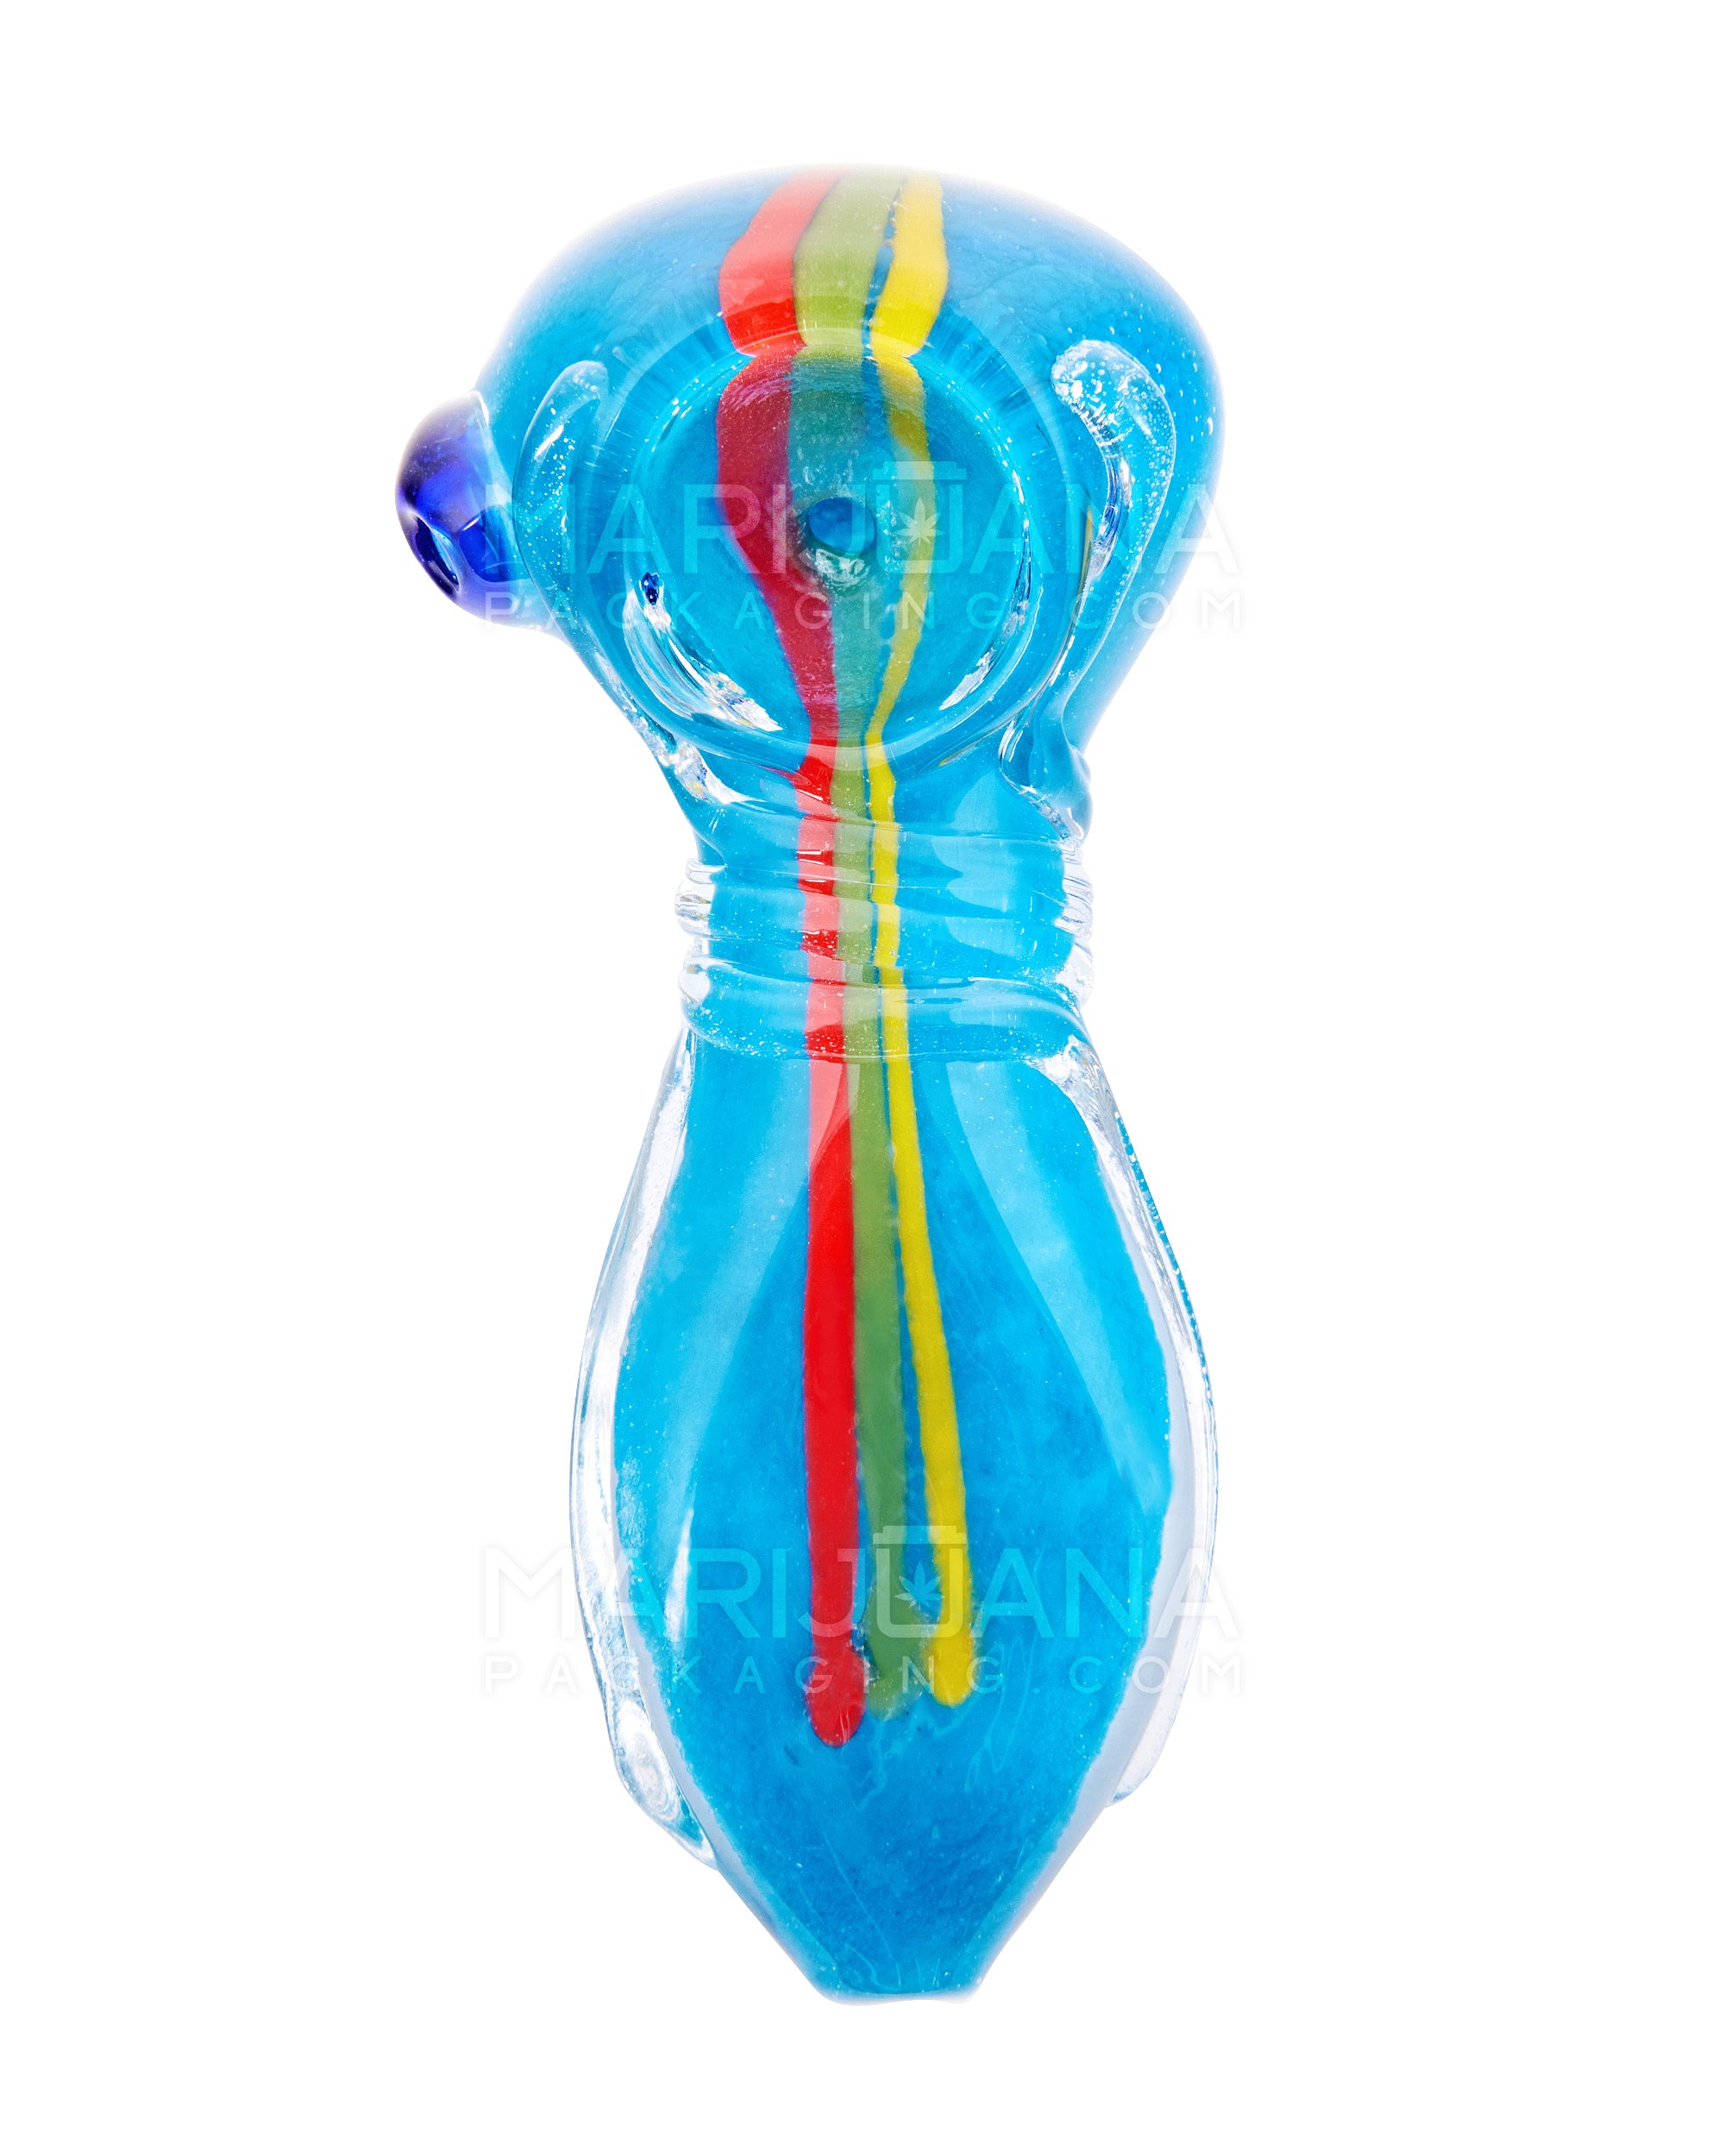 Frit & Striped Ringed Spoon Hand Pipe | 3.5in Long - Glass - Assorted